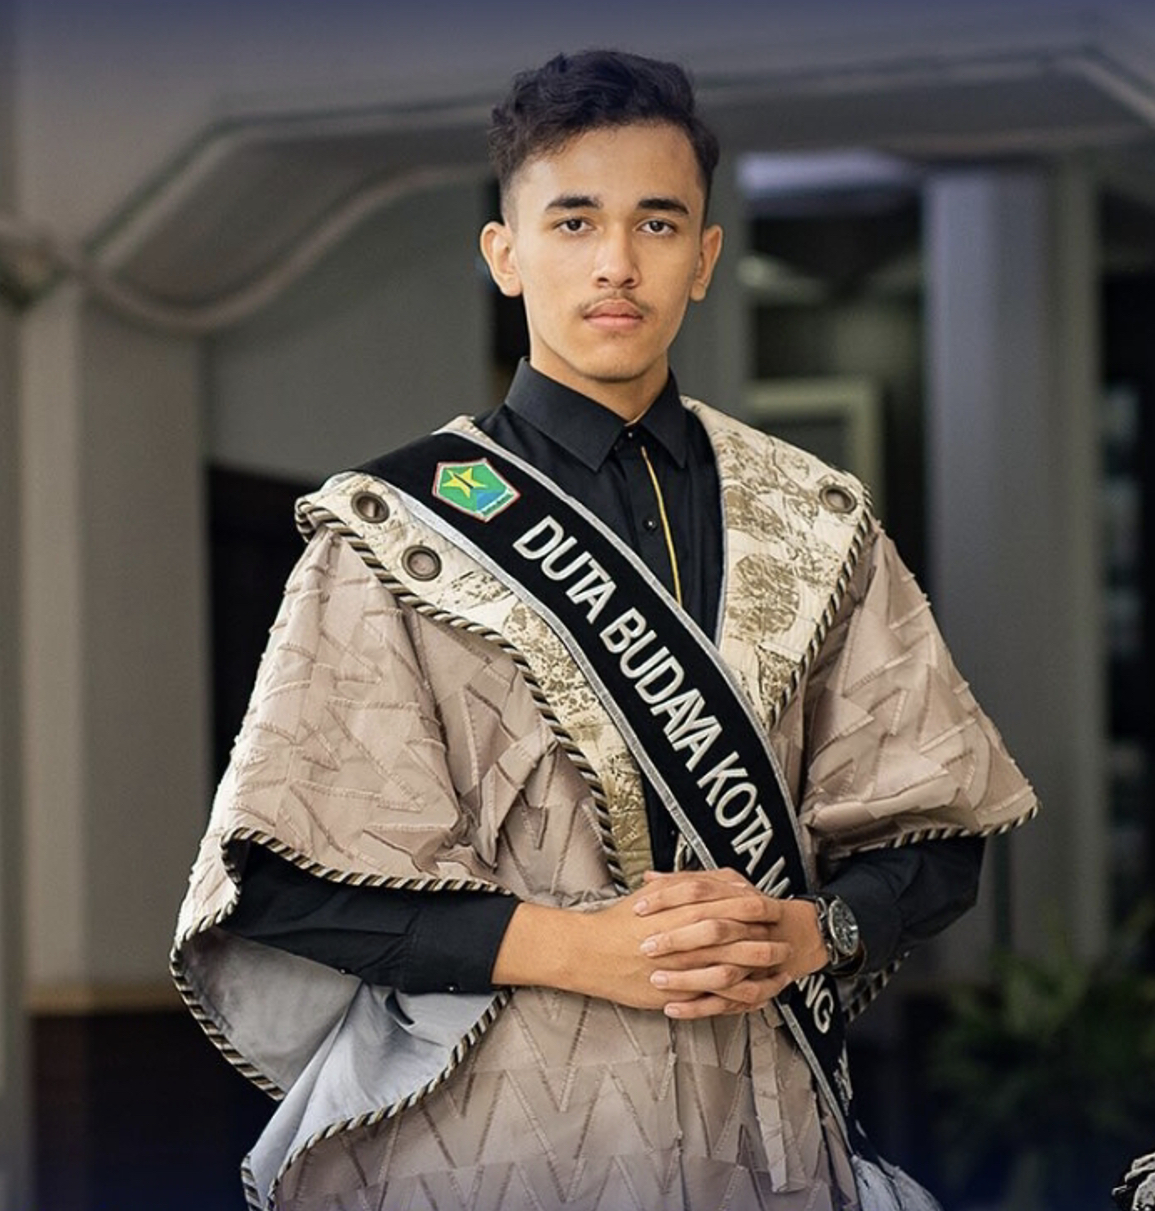 Zaky Afthoni Haidar becomes the top ten of finalists of Ambassador of Culture of Malang in September to October 2022.